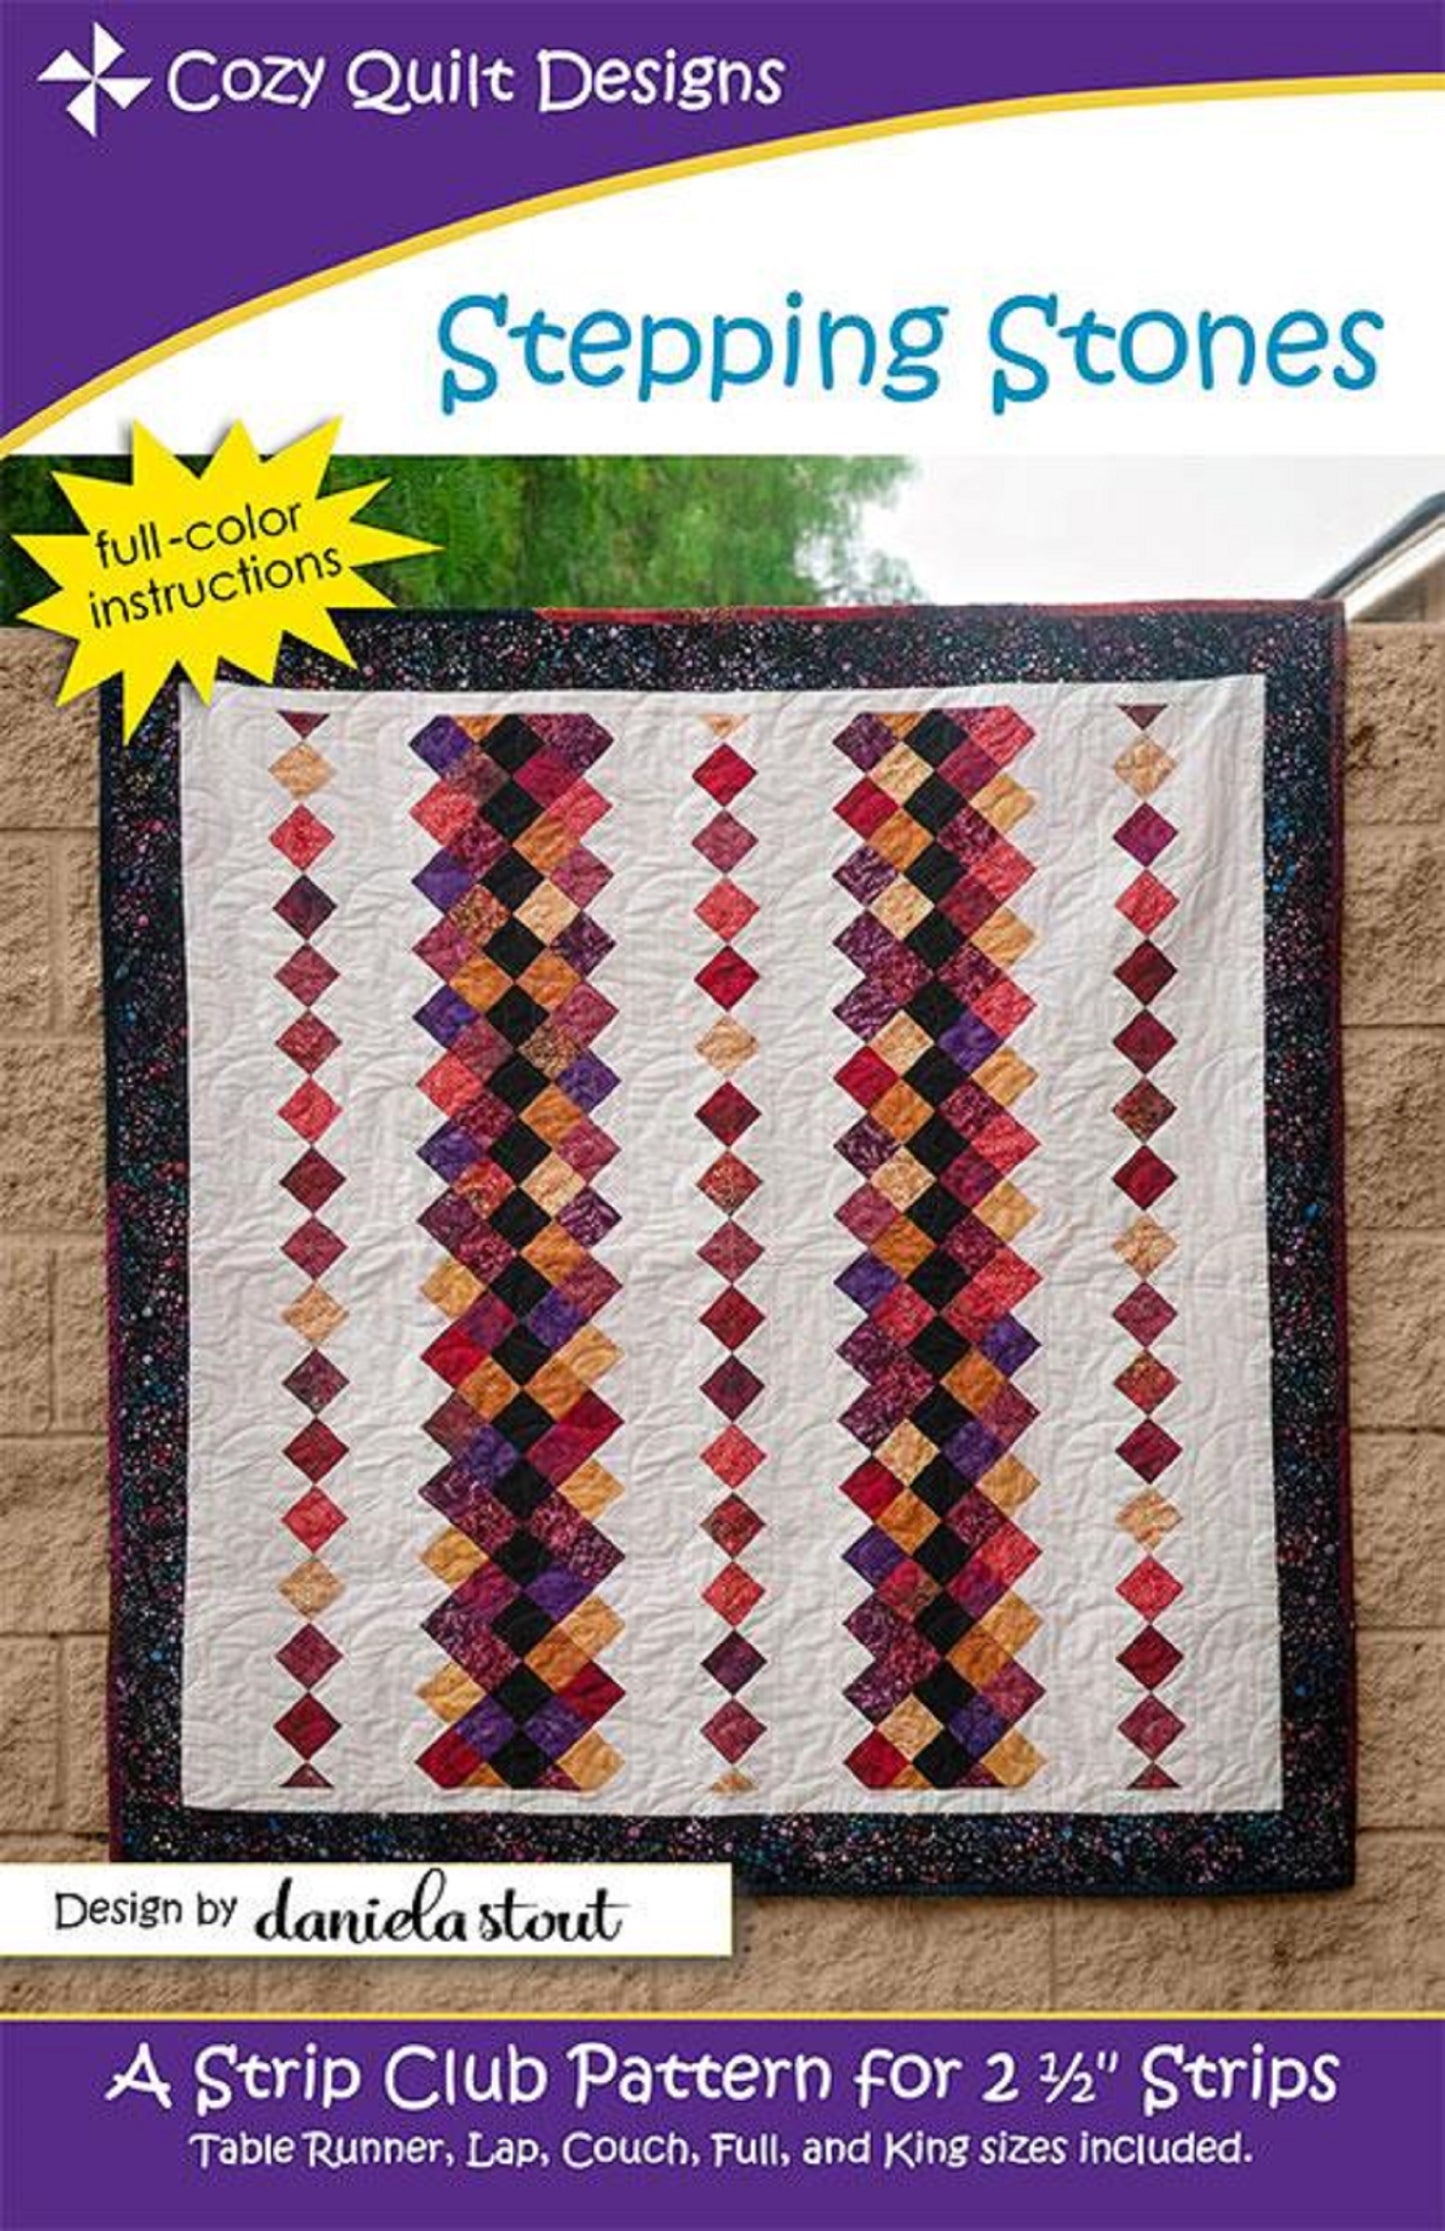 Stepping Stones Quilt Pattern by Cozy Quilt Designs-5 Sizes